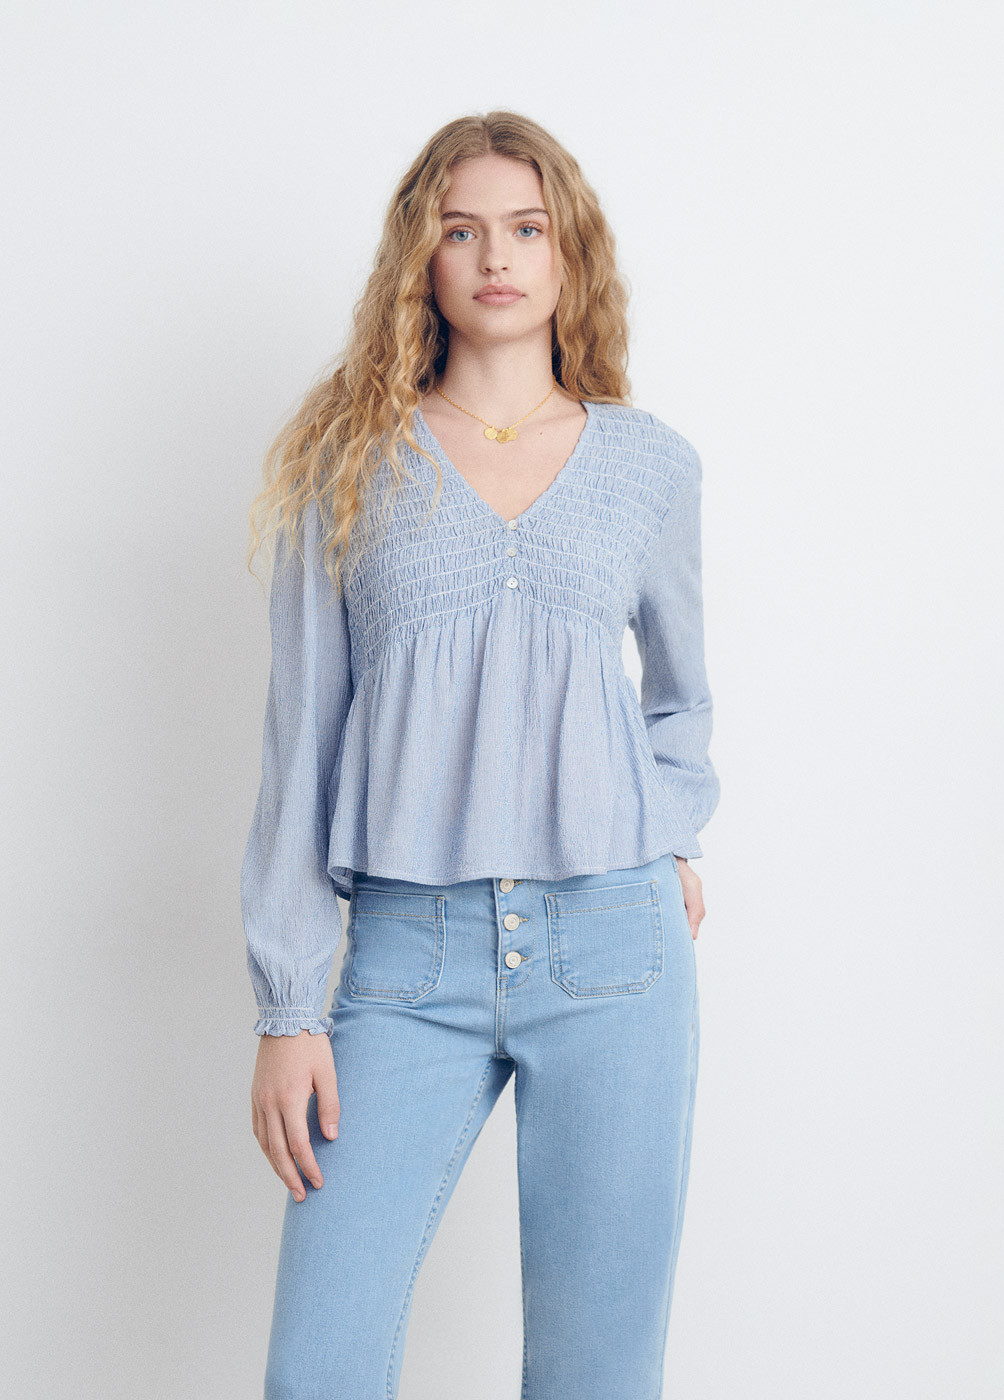 Cropped-bluse smock gestreift